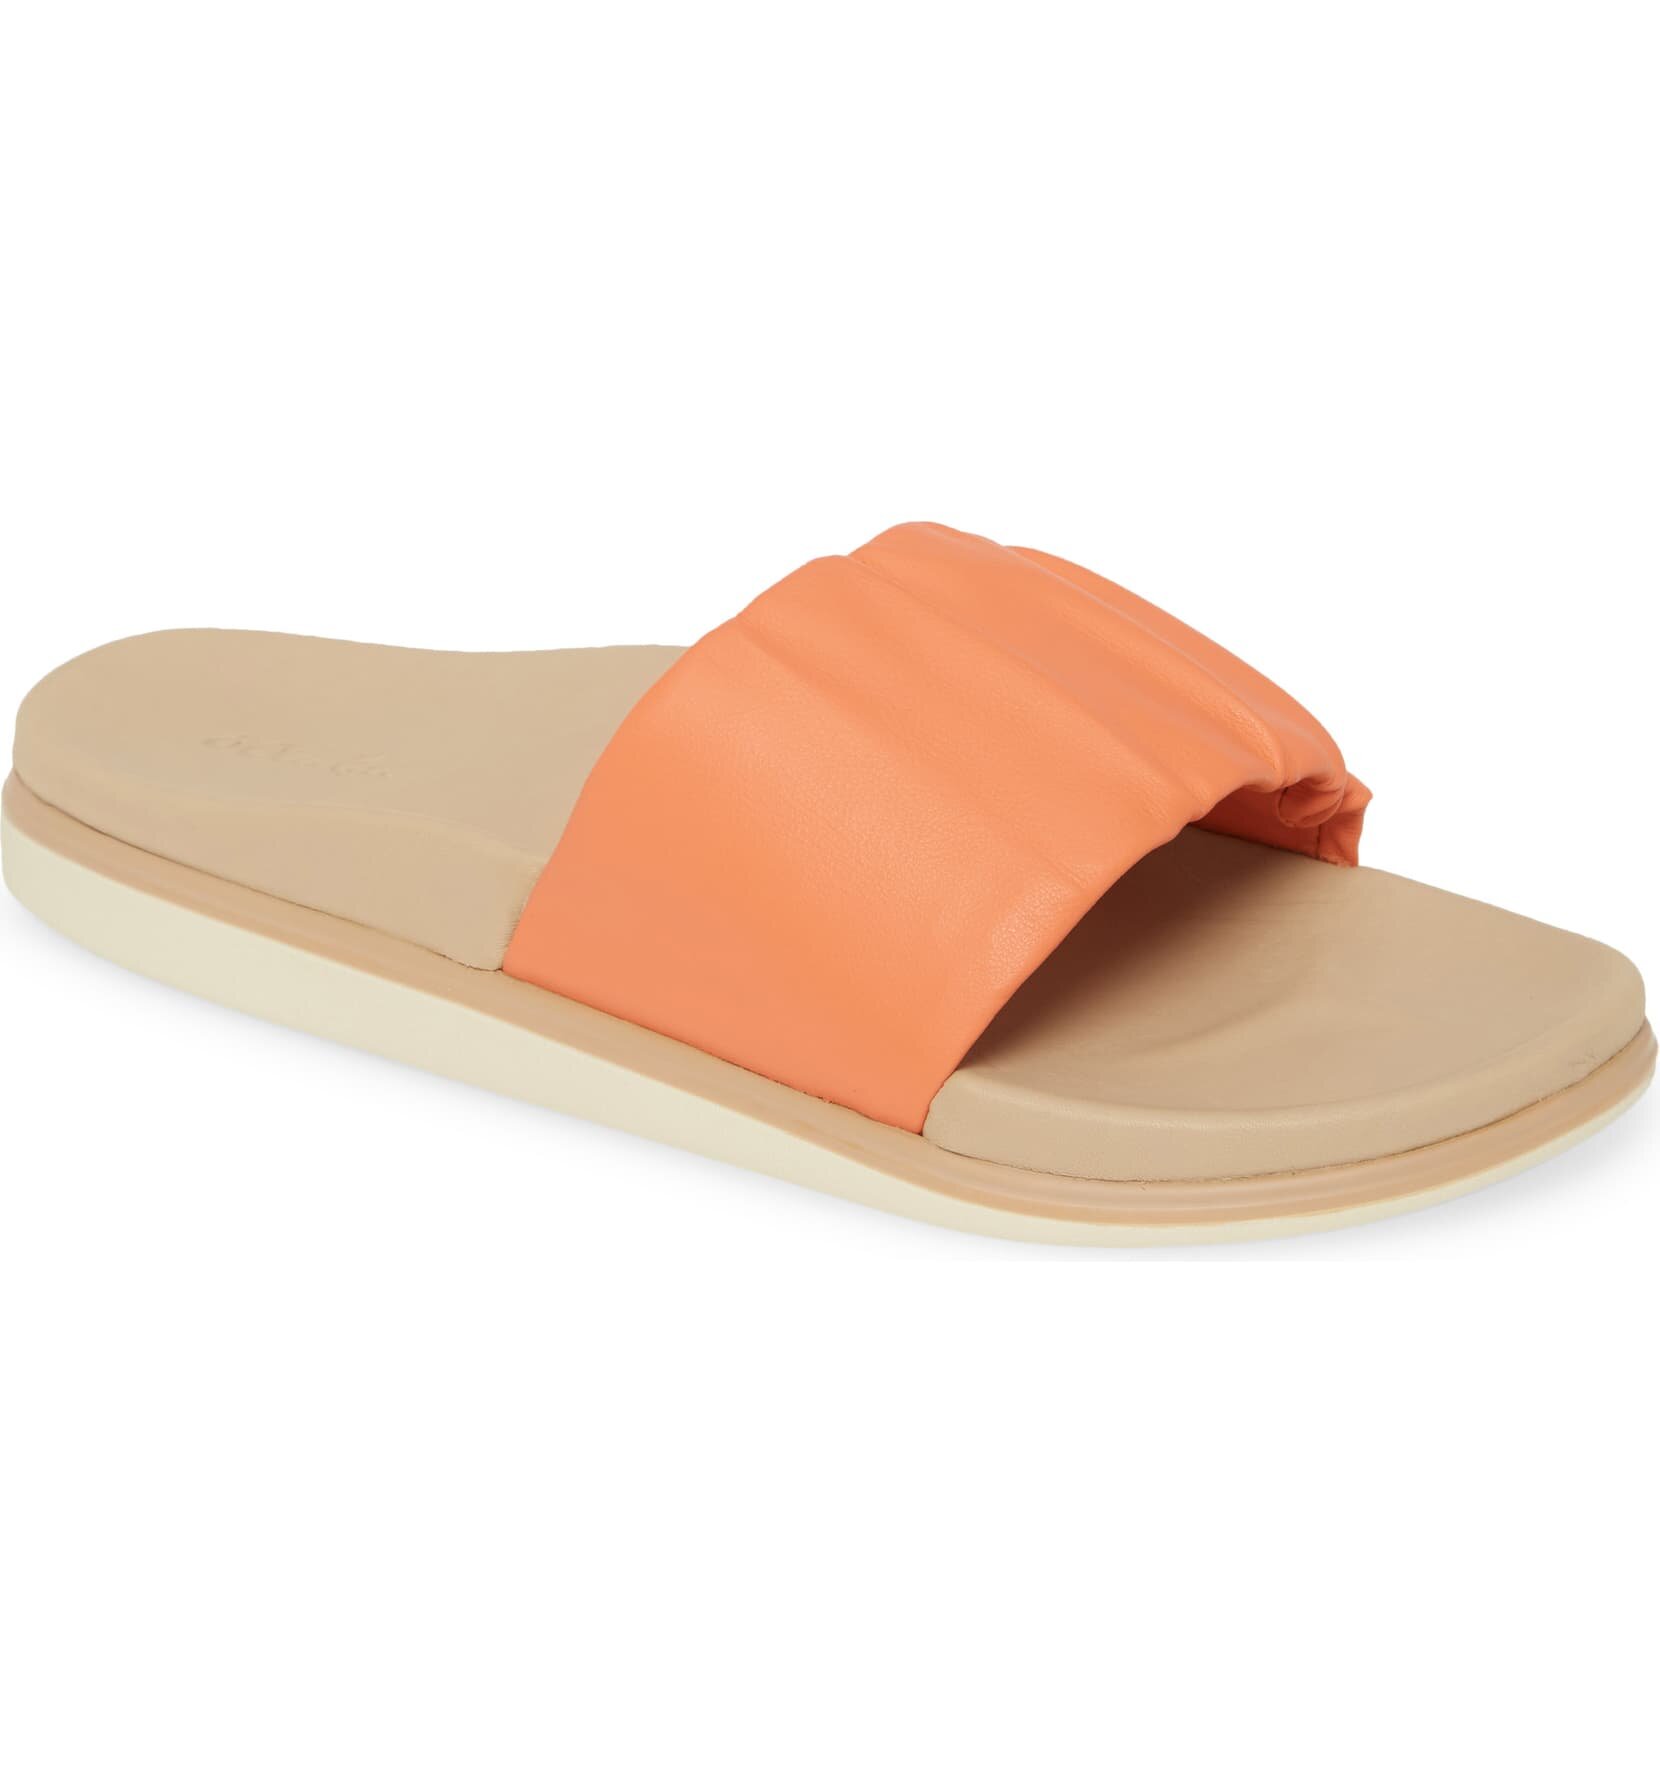 Love the Adidas slide but think it is too sporty for you? OluKai offers a sophisticated alternative.